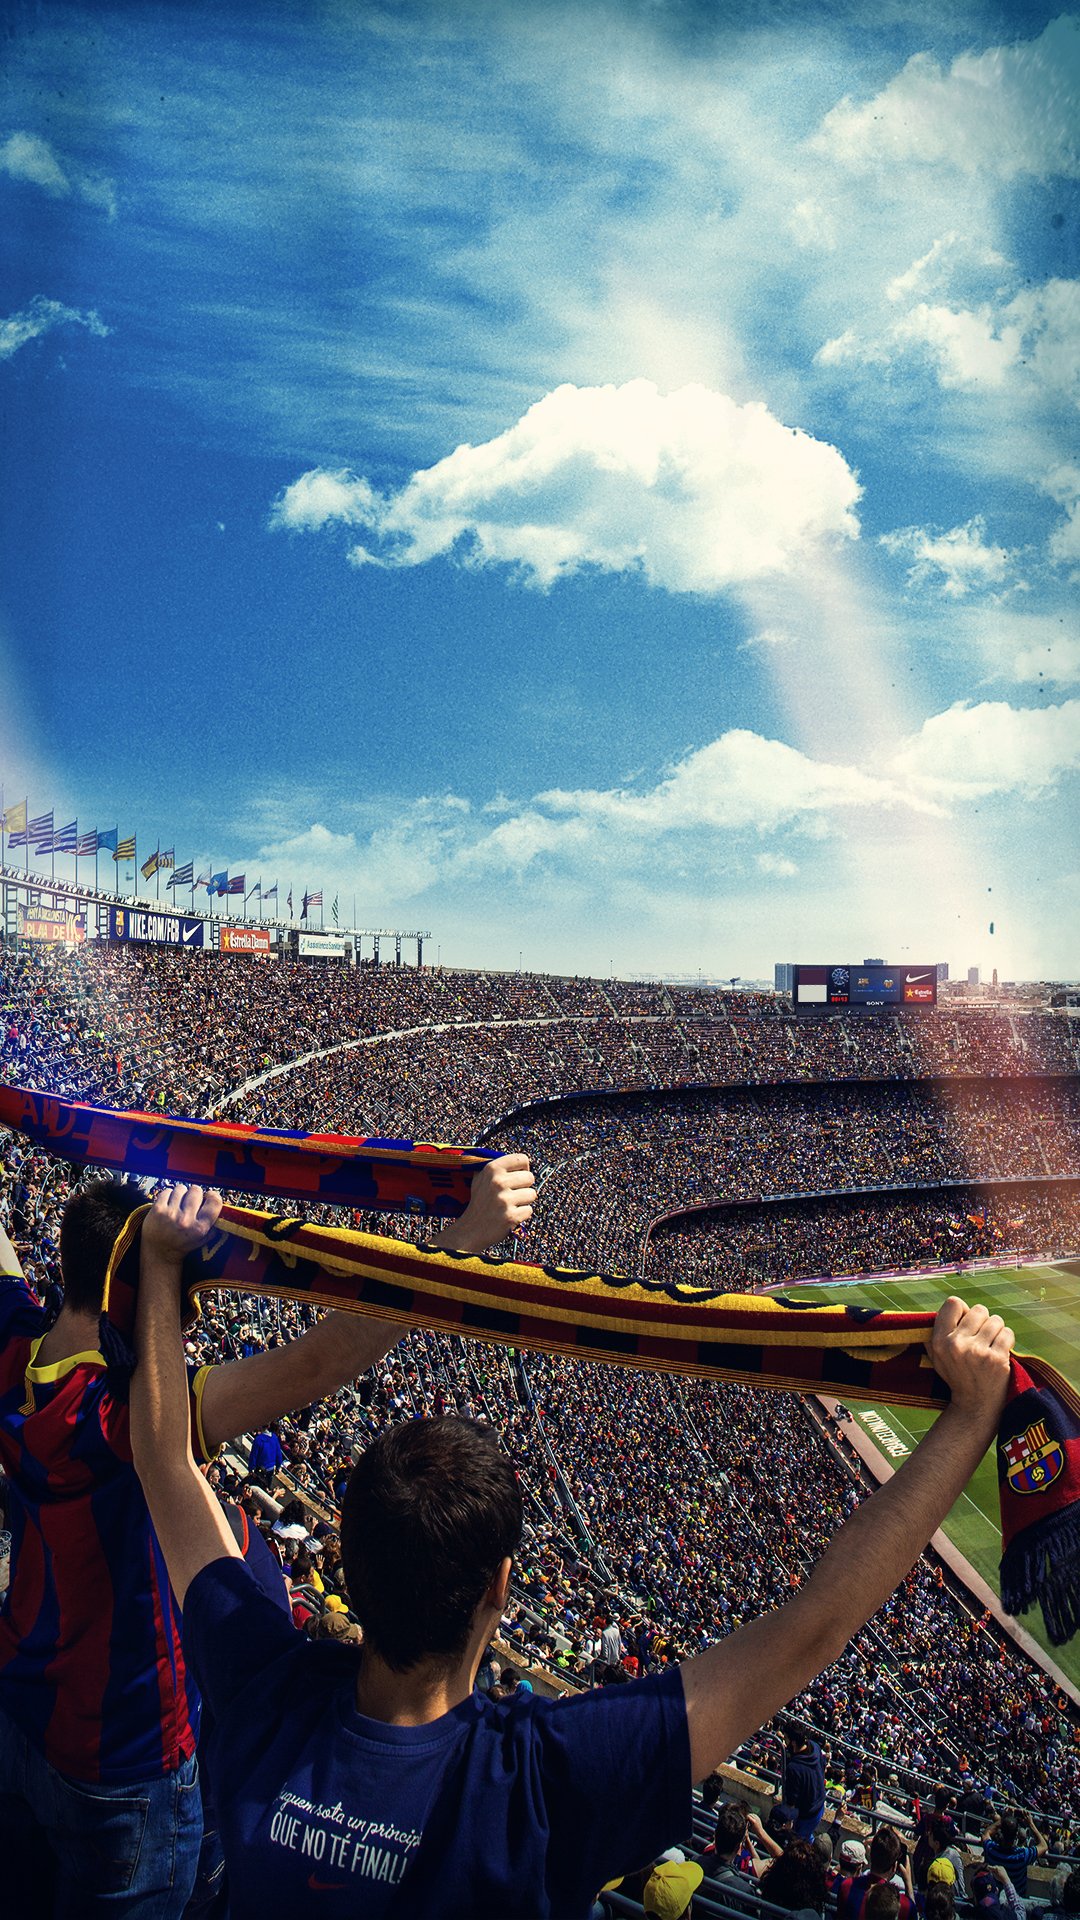 FC Barcelona - #WallpaperWednesday. The only question is: Home screen, Lock screen, or both?